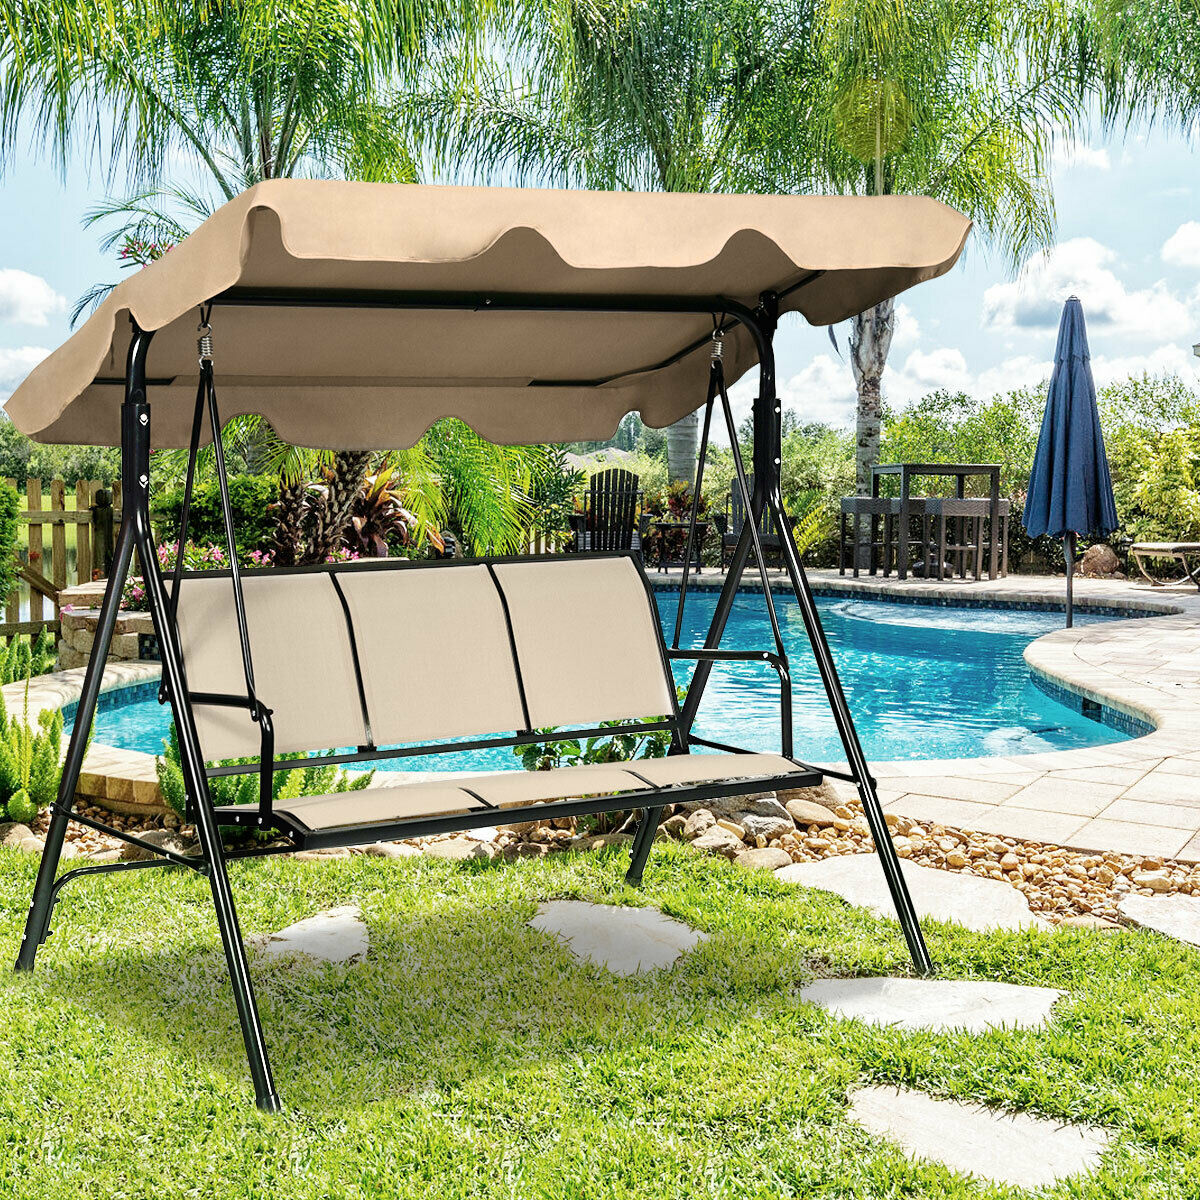 3 Seater Garden Swing Chair with Adjustable Canopy-Brown